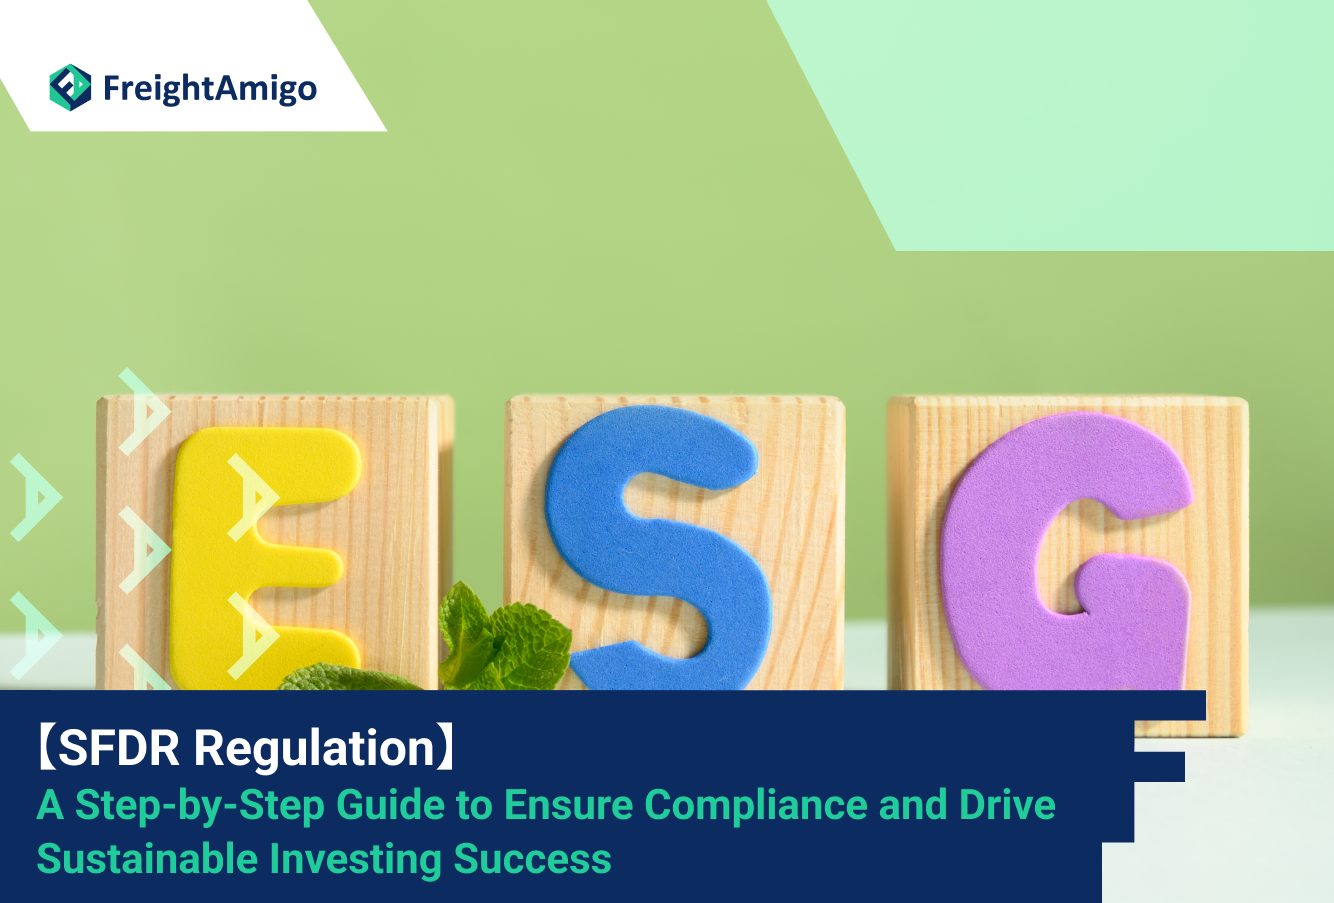 SFDR Regulation: A Step-by-Step Guide to Ensure Compliance and Drive Sustainable Investing Success